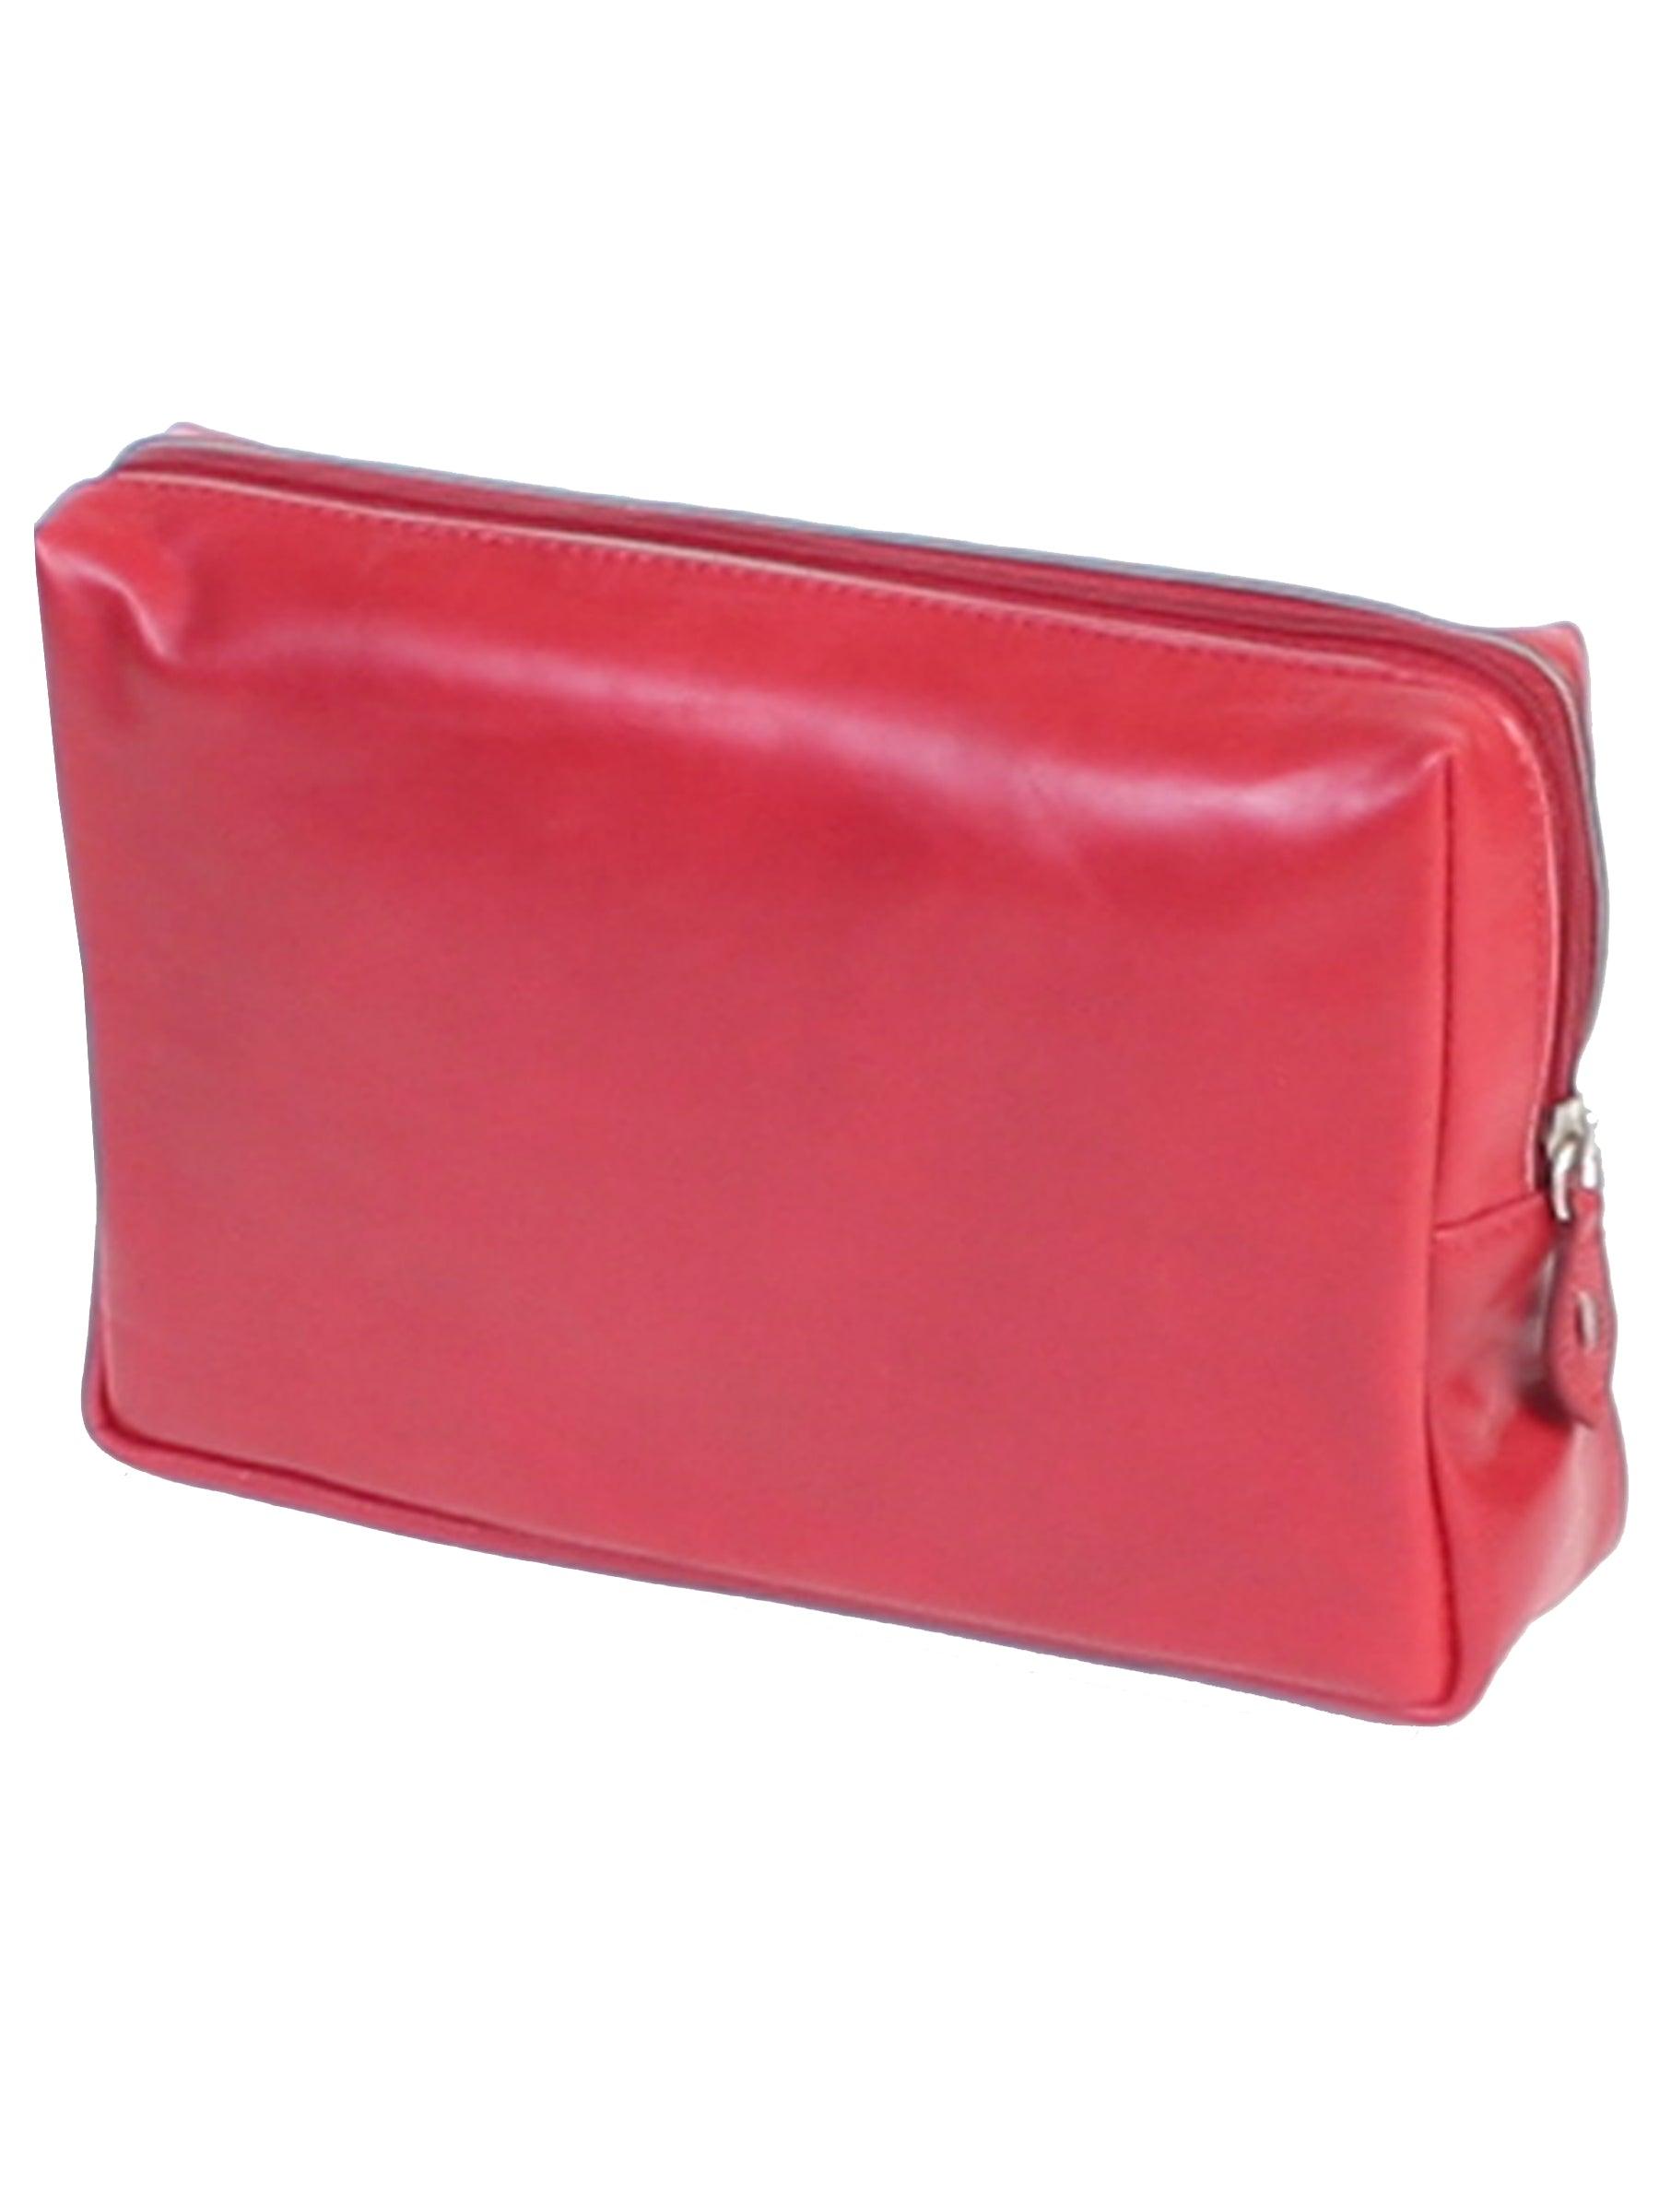 Scully RED COSMETIC BAG - Flyclothing LLC